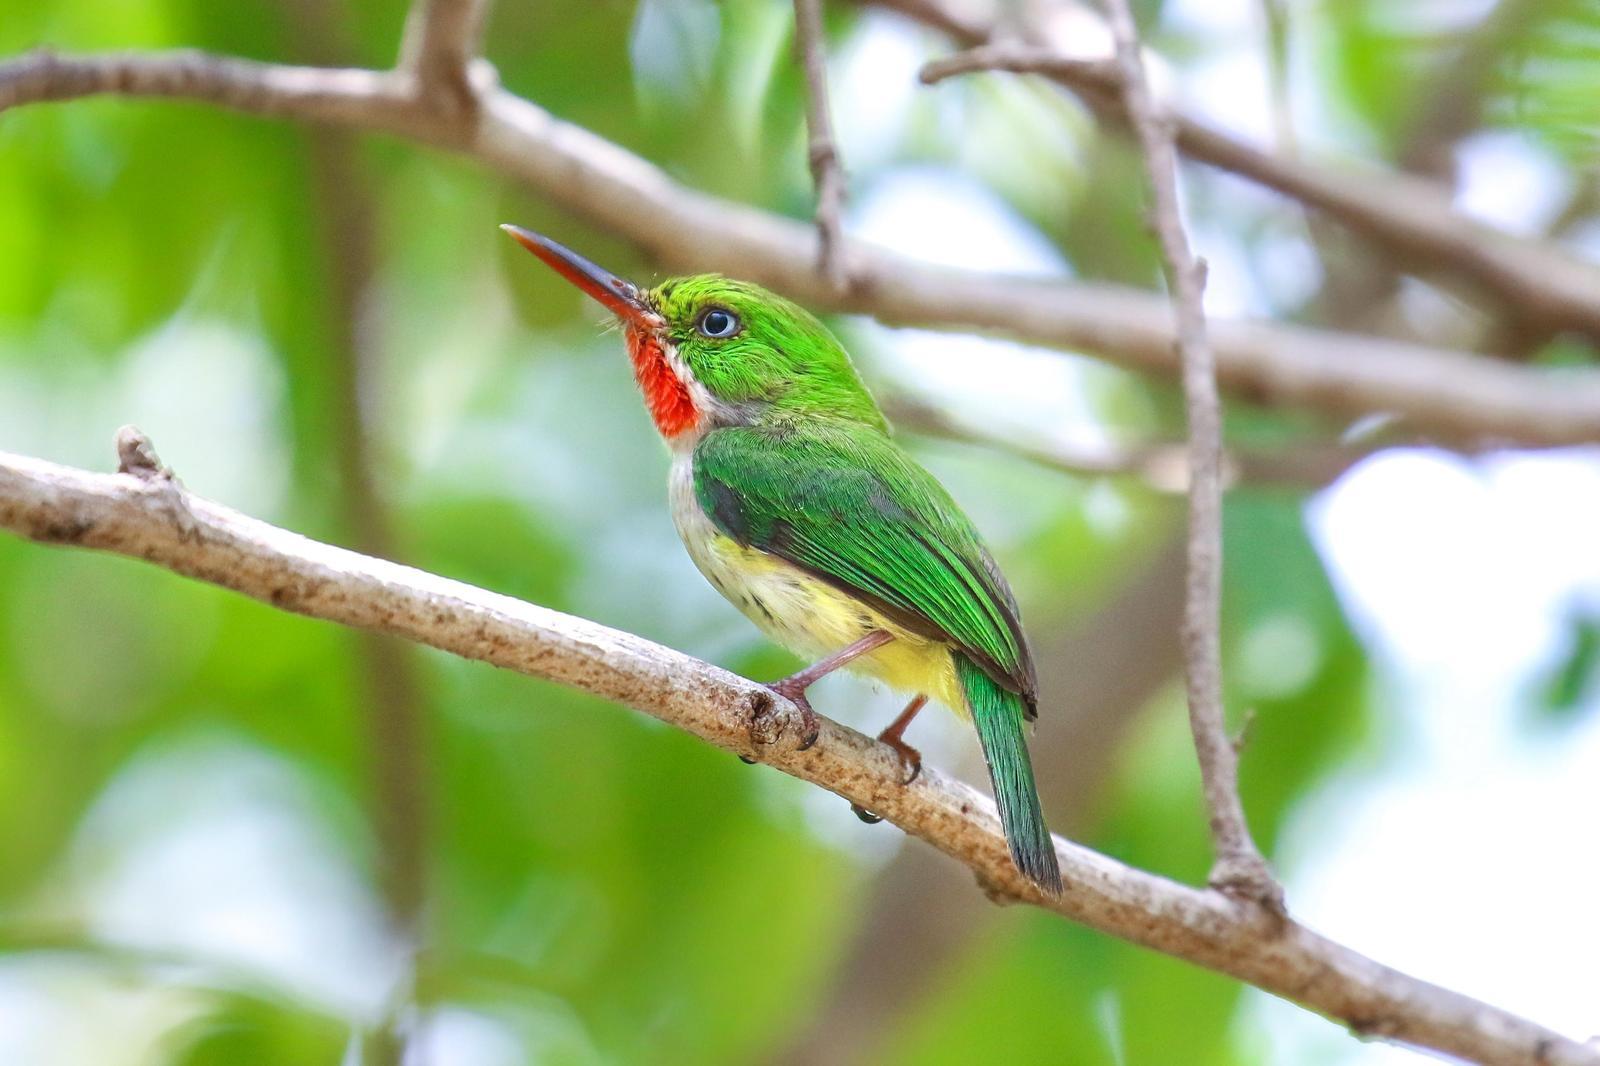 Puerto Rican Tody Photo by Tom Ford-Hutchinson